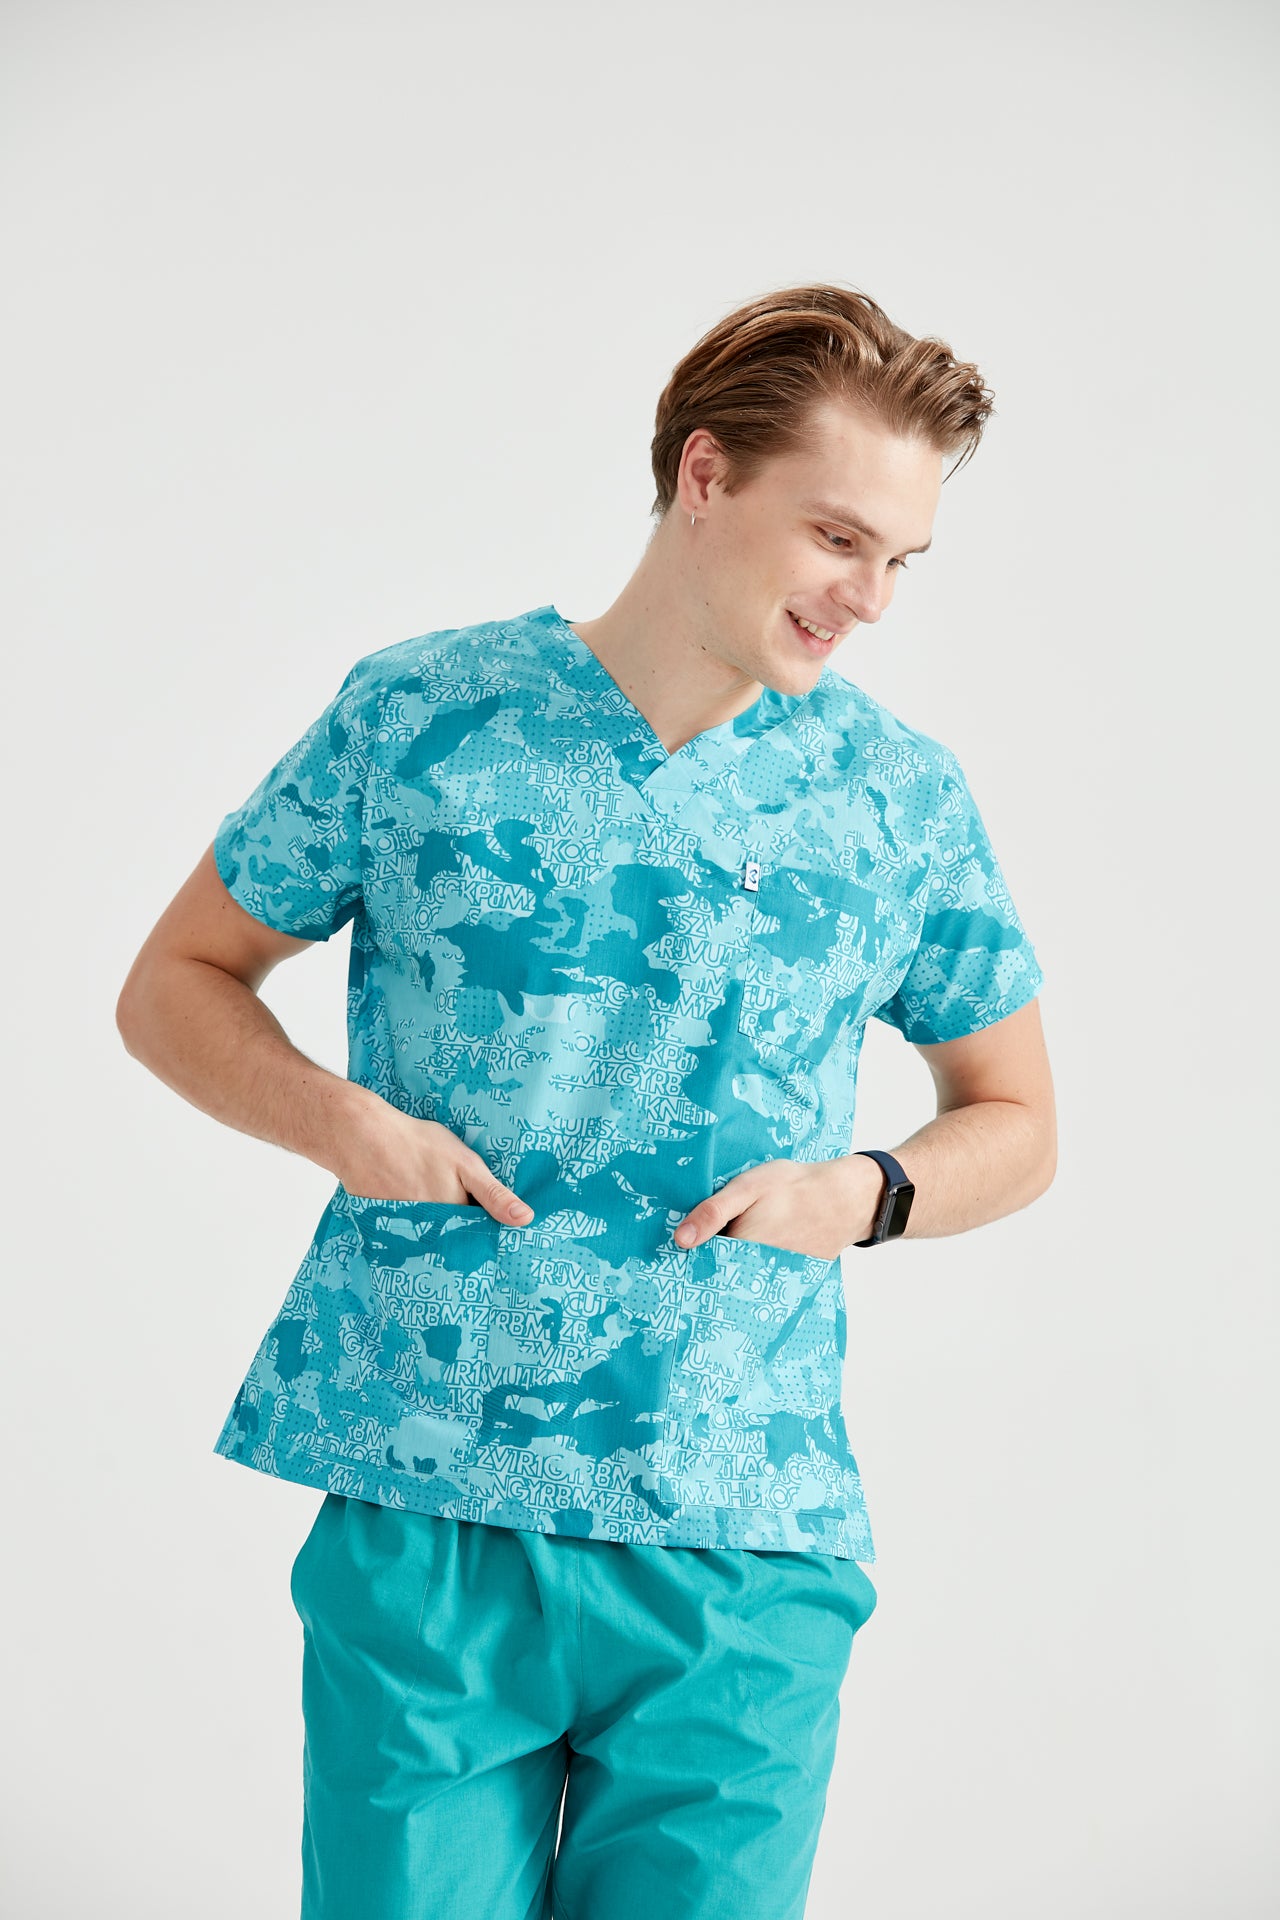 Asistent medical imbracat in bluza Turquoise Camouflage, cu mainile in buzunar, vedere din fata  